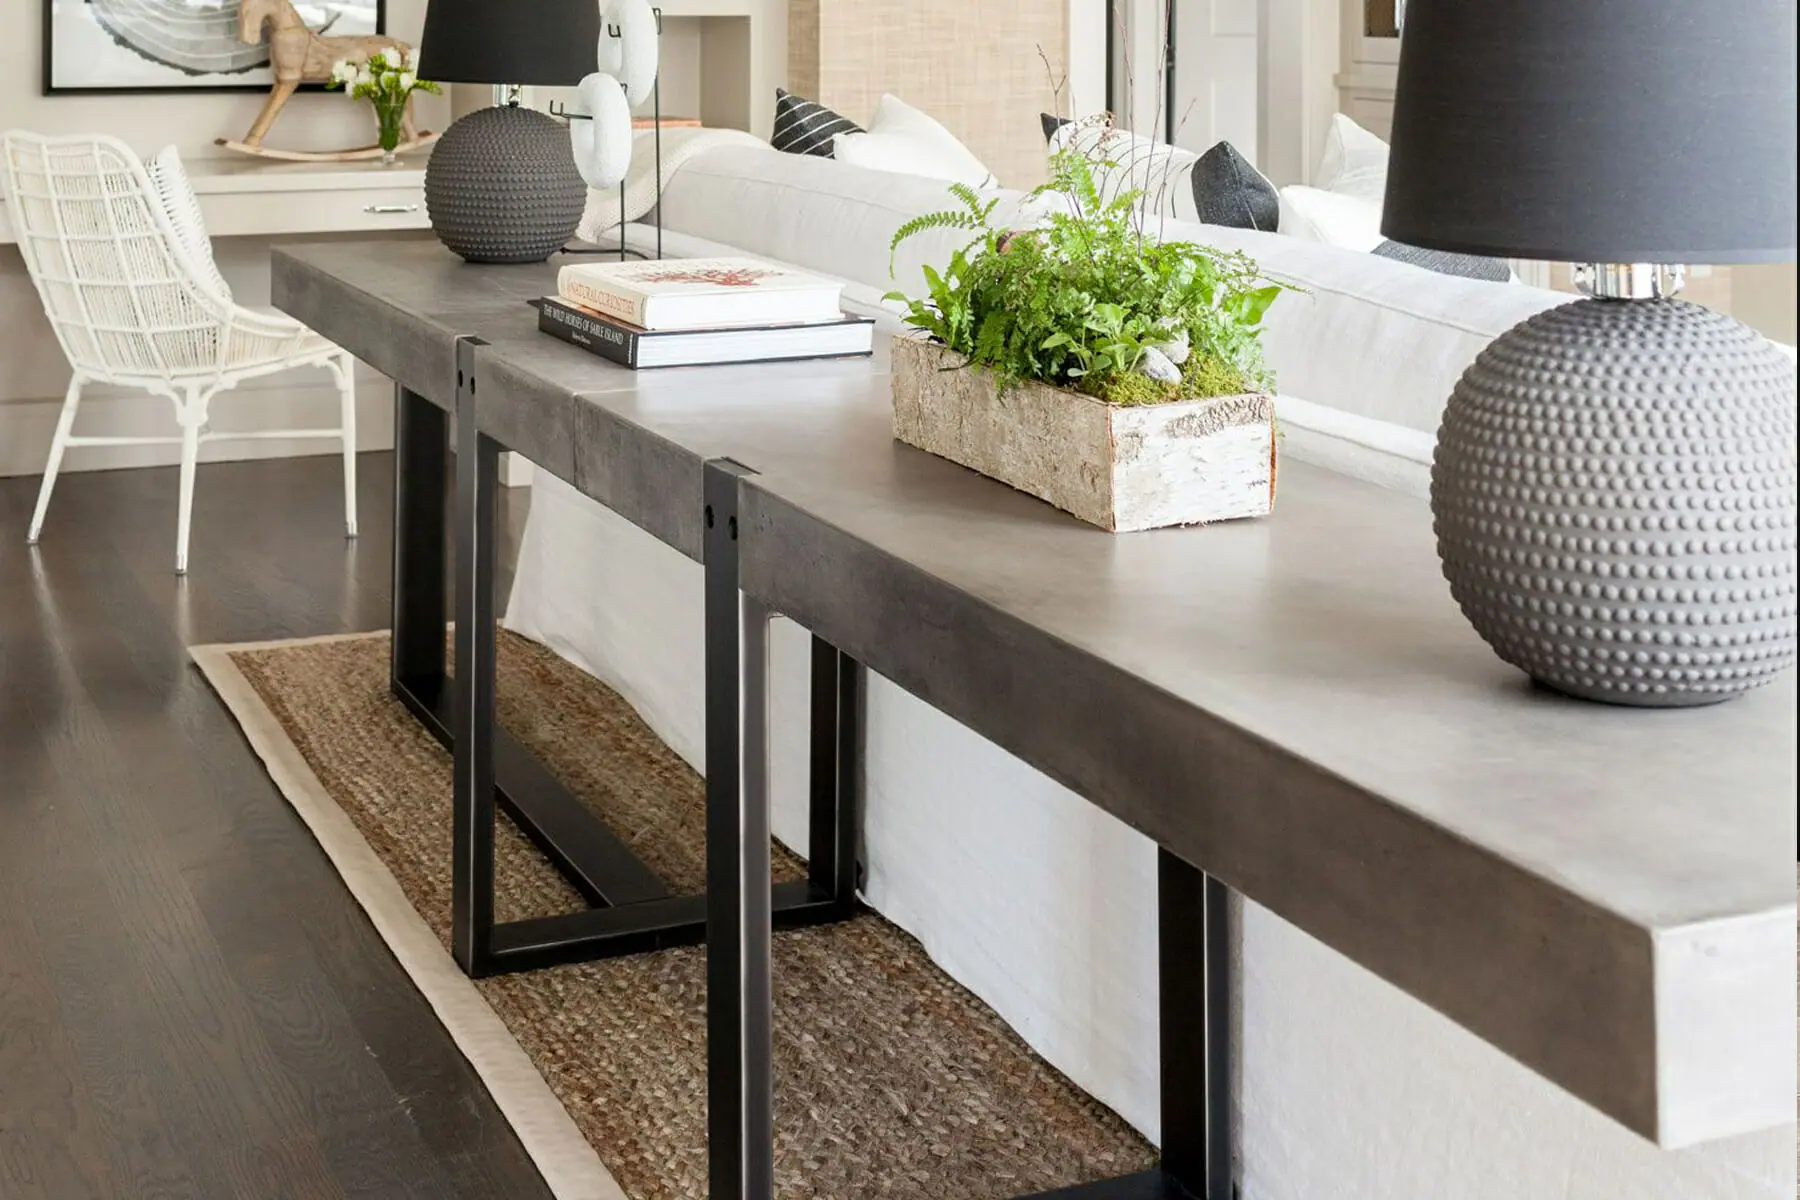 How Long Should A Console Table Be Behind A Sofa